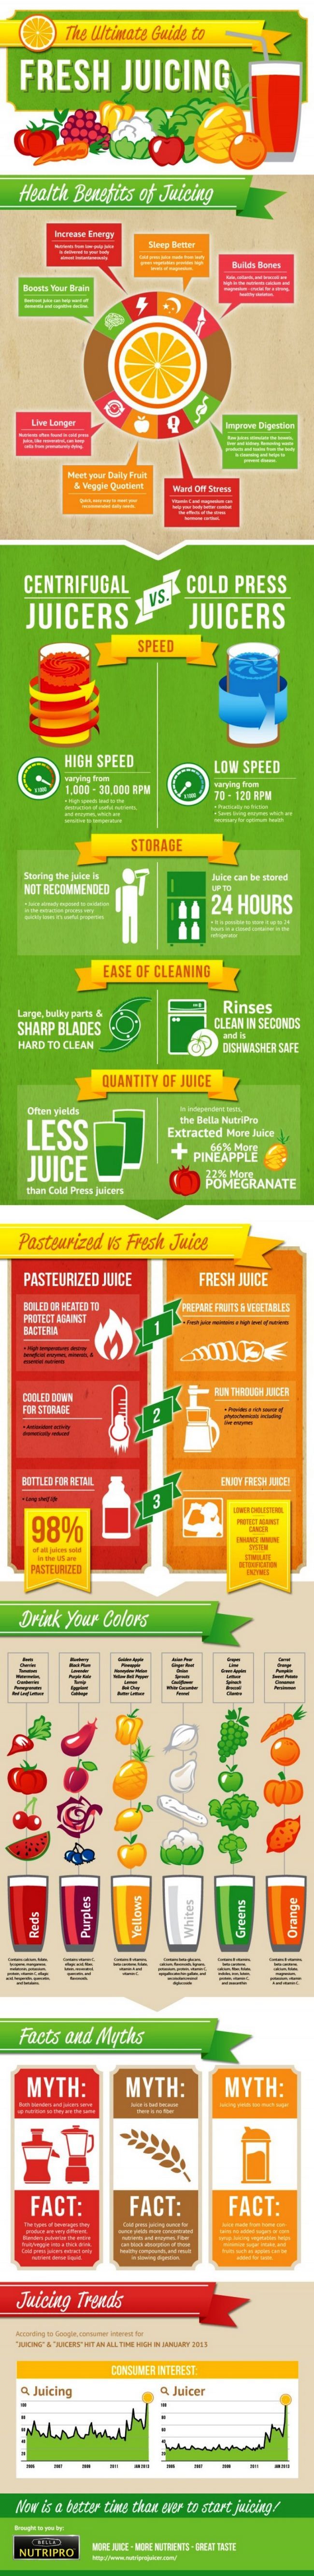 Guide complet Juicing